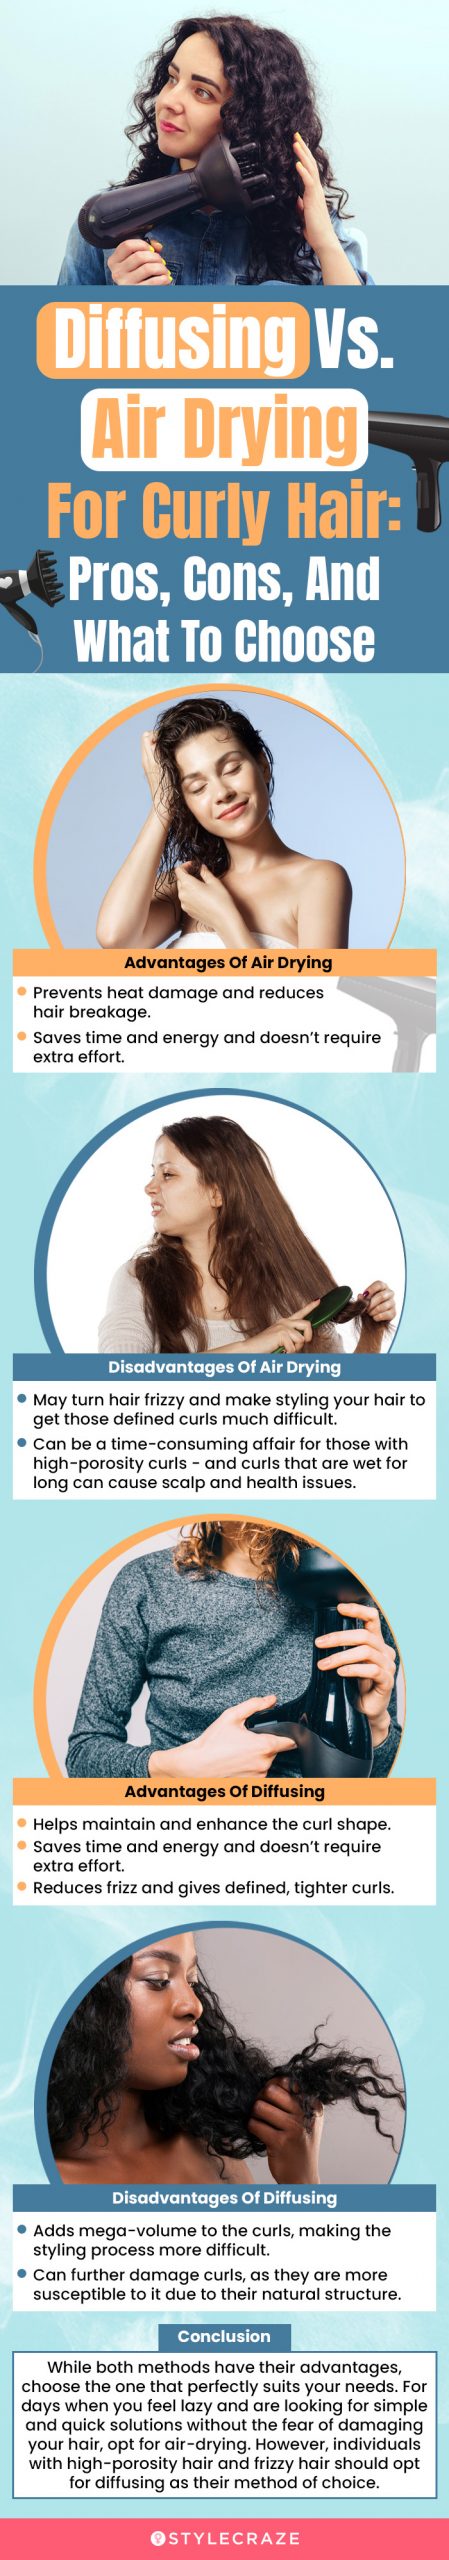 diffusing vs. air drying for curly hair pros, cons, and what to choose [infographic]